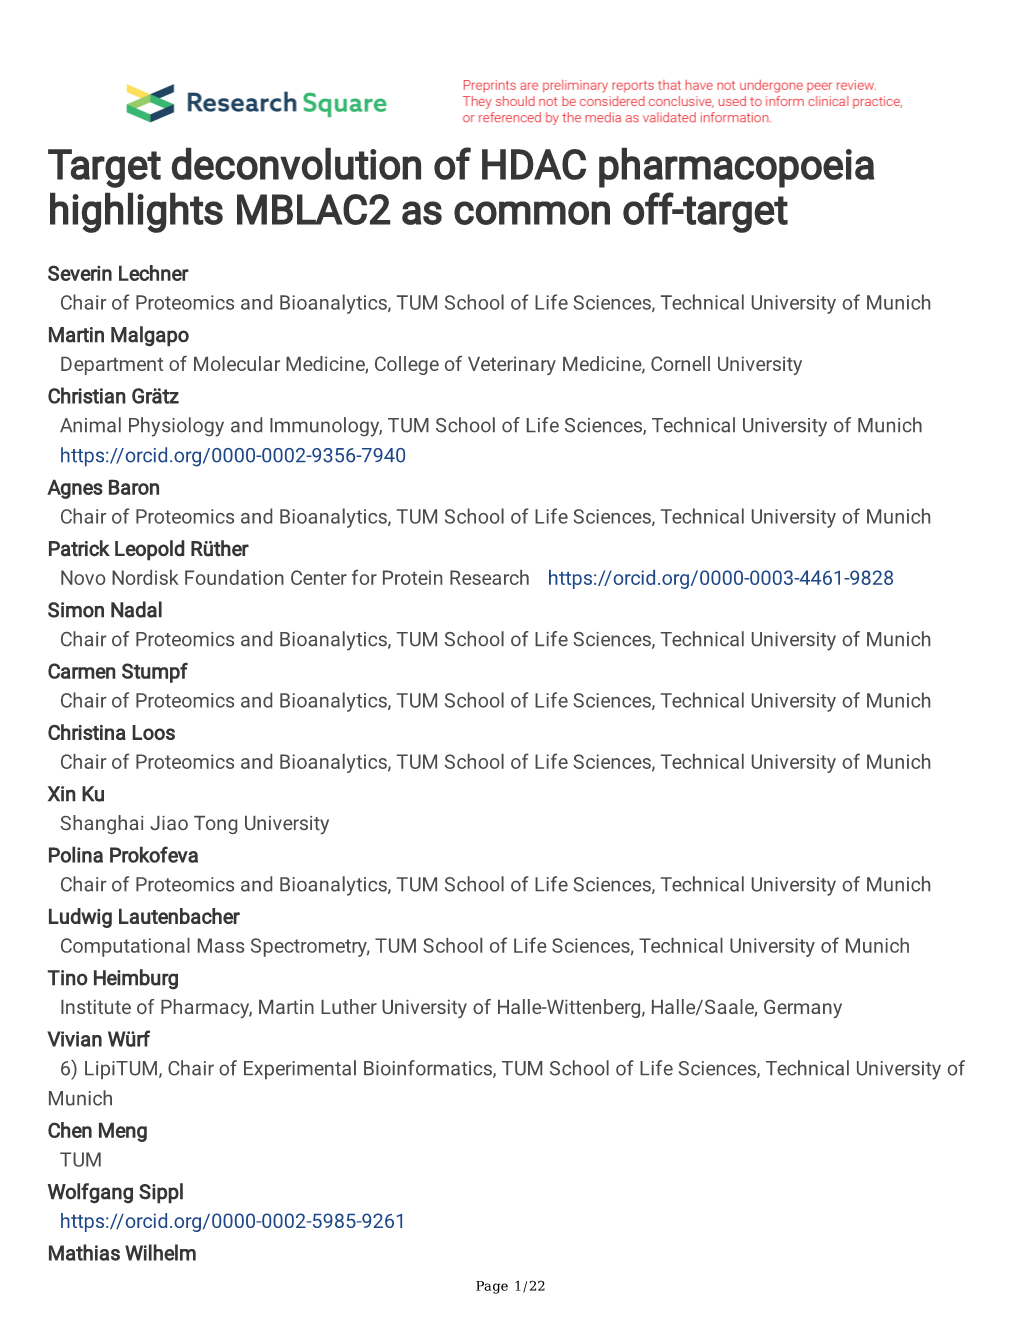 Target Deconvolution of HDAC Pharmacopoeia Highlights MBLAC2 As Common Off-Target